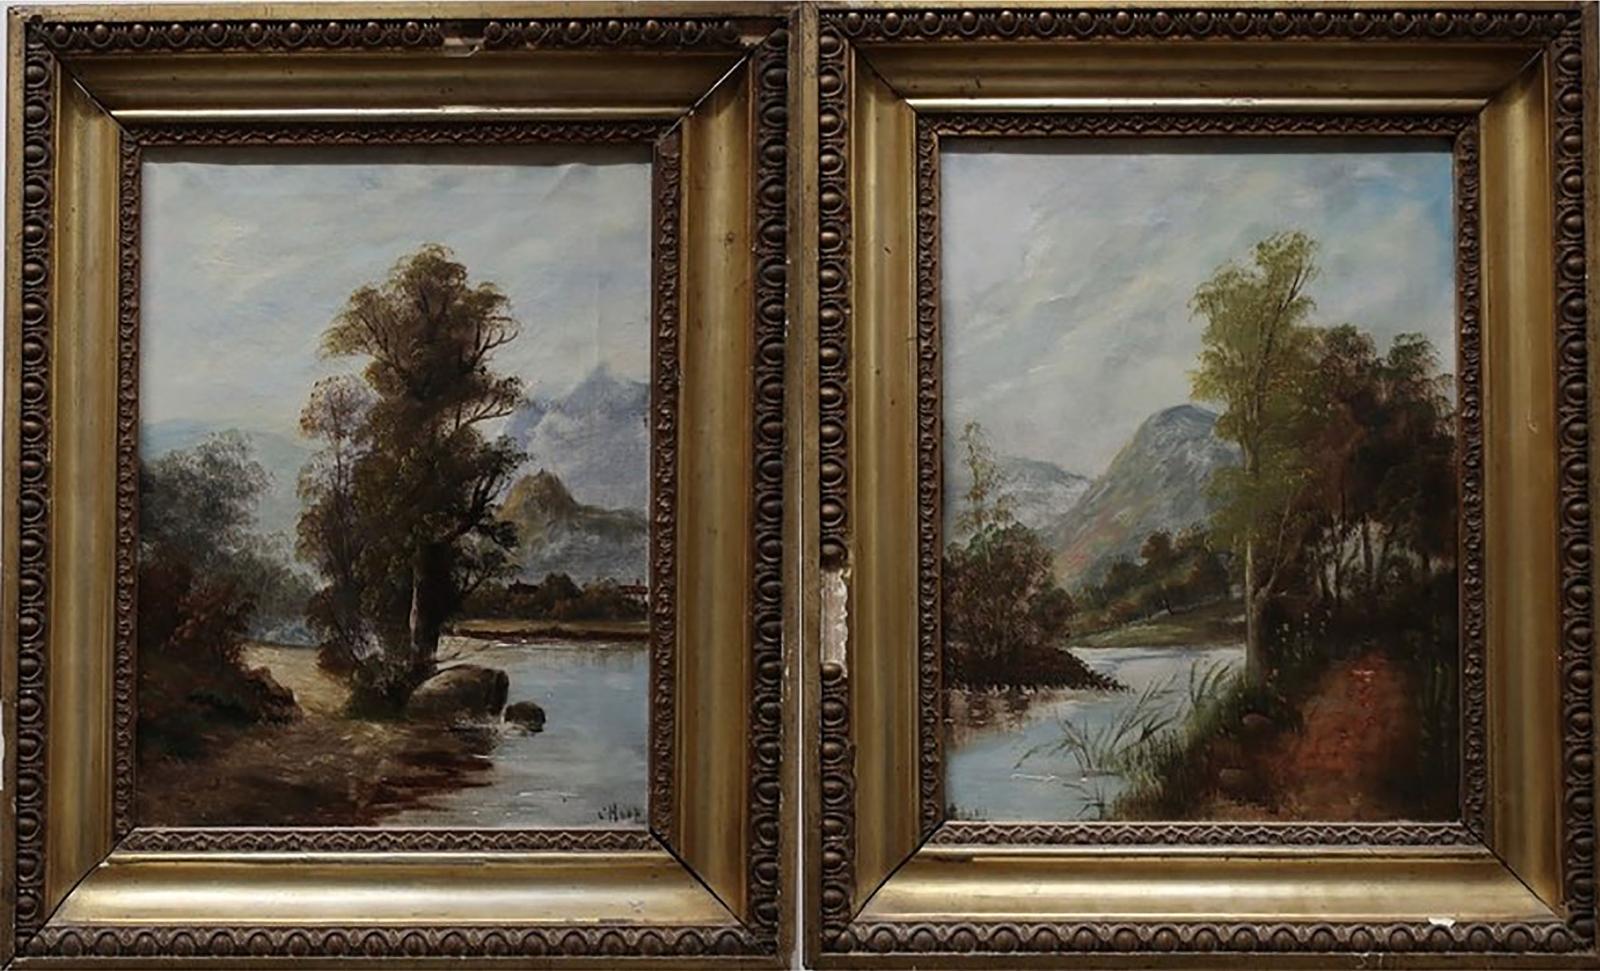 C. Hoop - River Landscapes With Distant Mountains